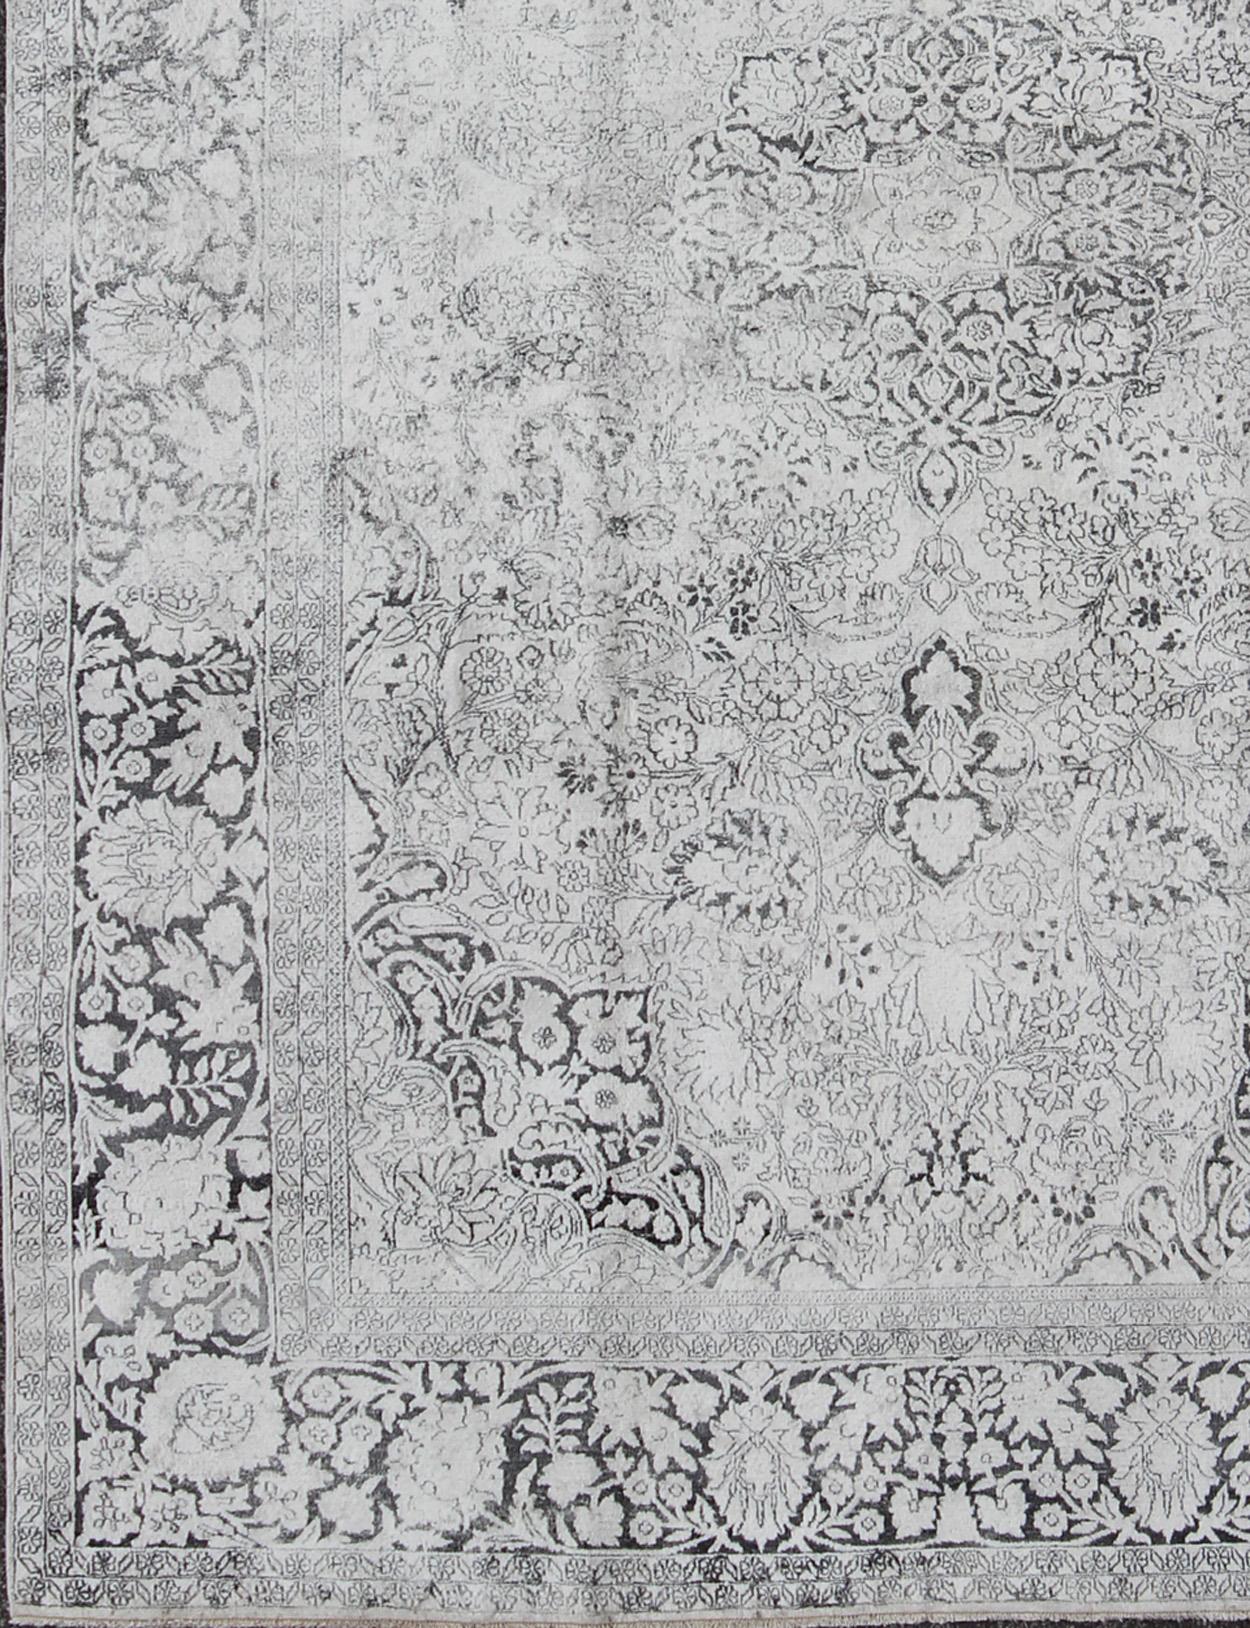 Measures: 7'1 x 10'3.

Sivas rugs are products of the Sivas province in central Turkey. This particular piece is characterized by a palette of cool colors such as light gray and blue. The border, which consists of a floral, leafy motif, frames